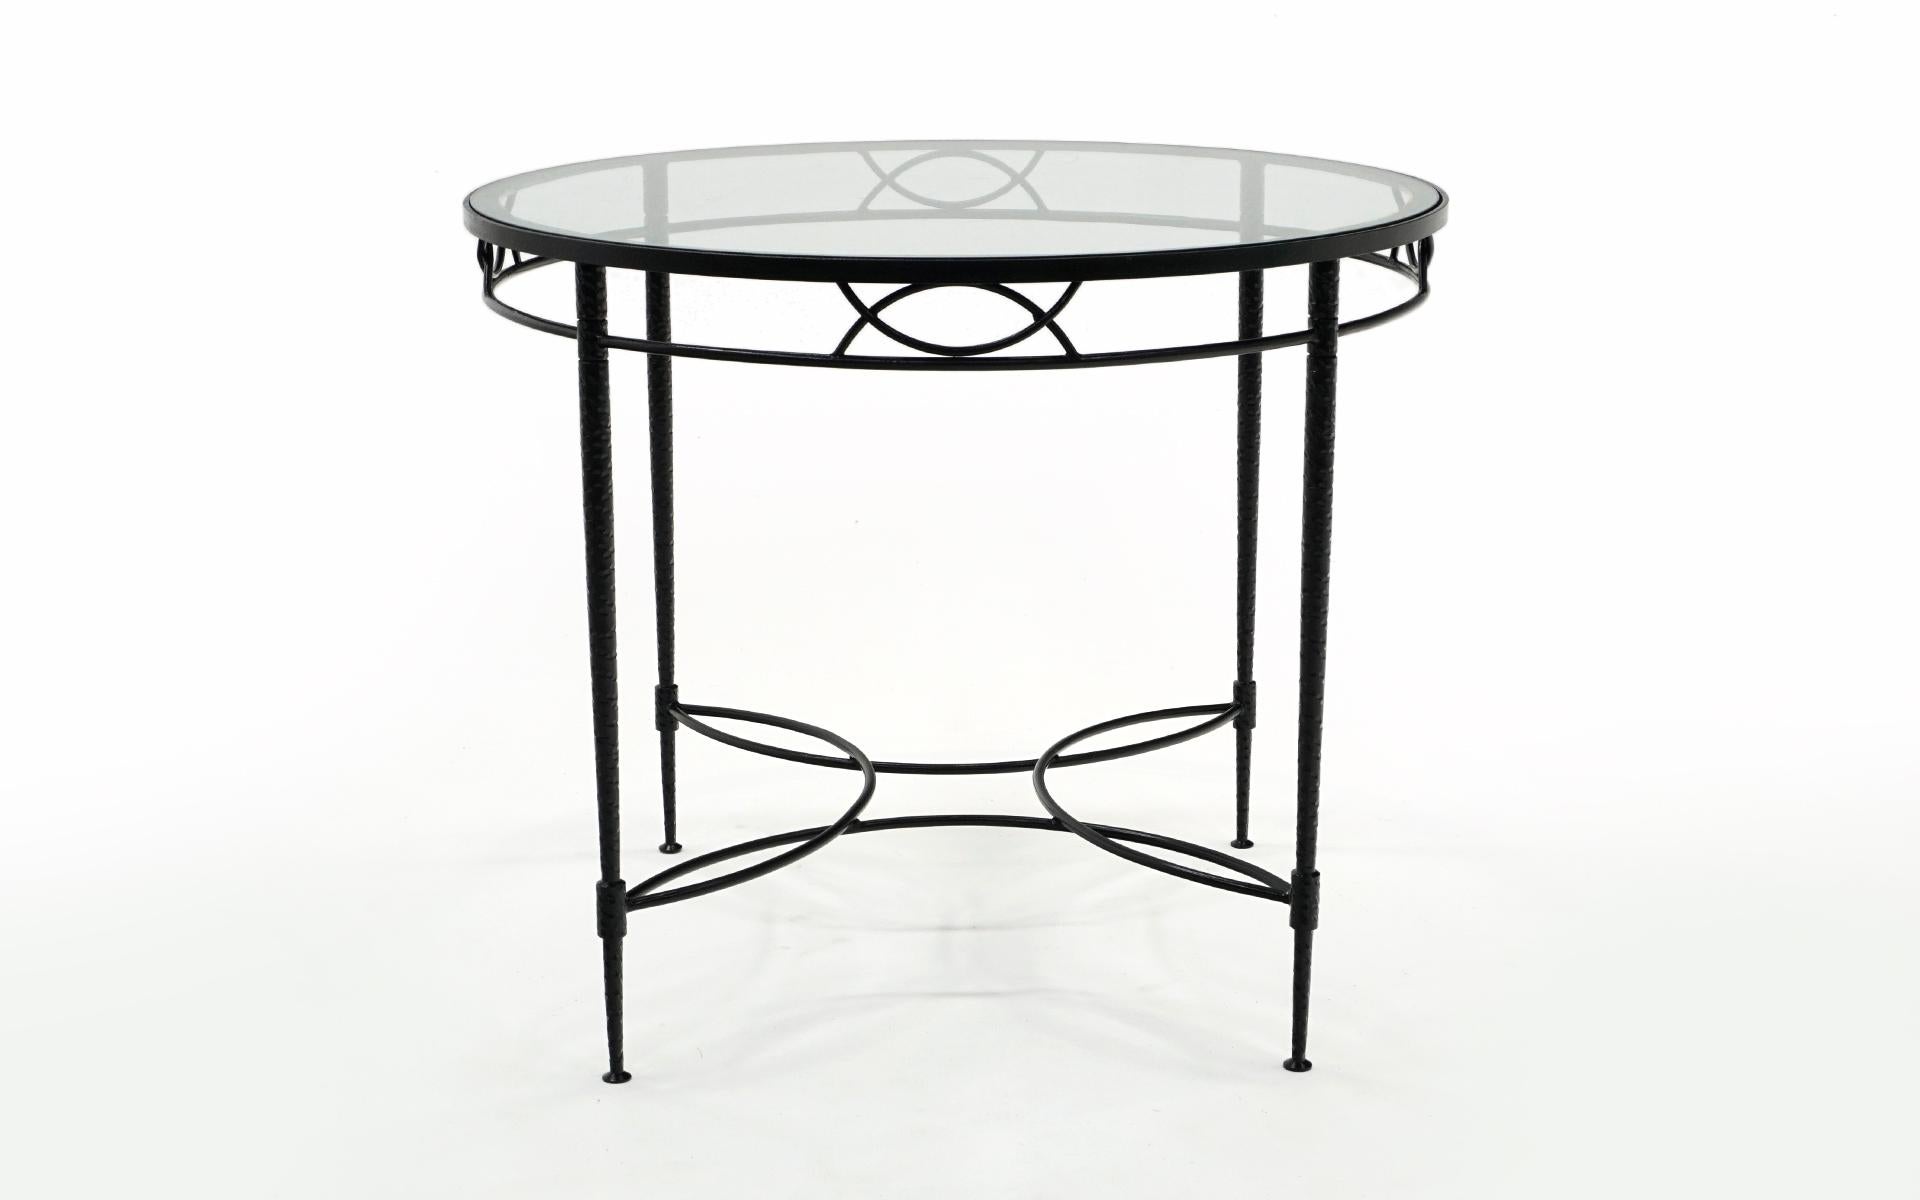 Outdoor / Patio / Pool / dining table designed by Mario Papperzini for John Salterini. Wrought iron and glass. Professonally media blasted and powder coated in a satin black finish. This is hand wrought iron with a distinctive pattern in the iron as